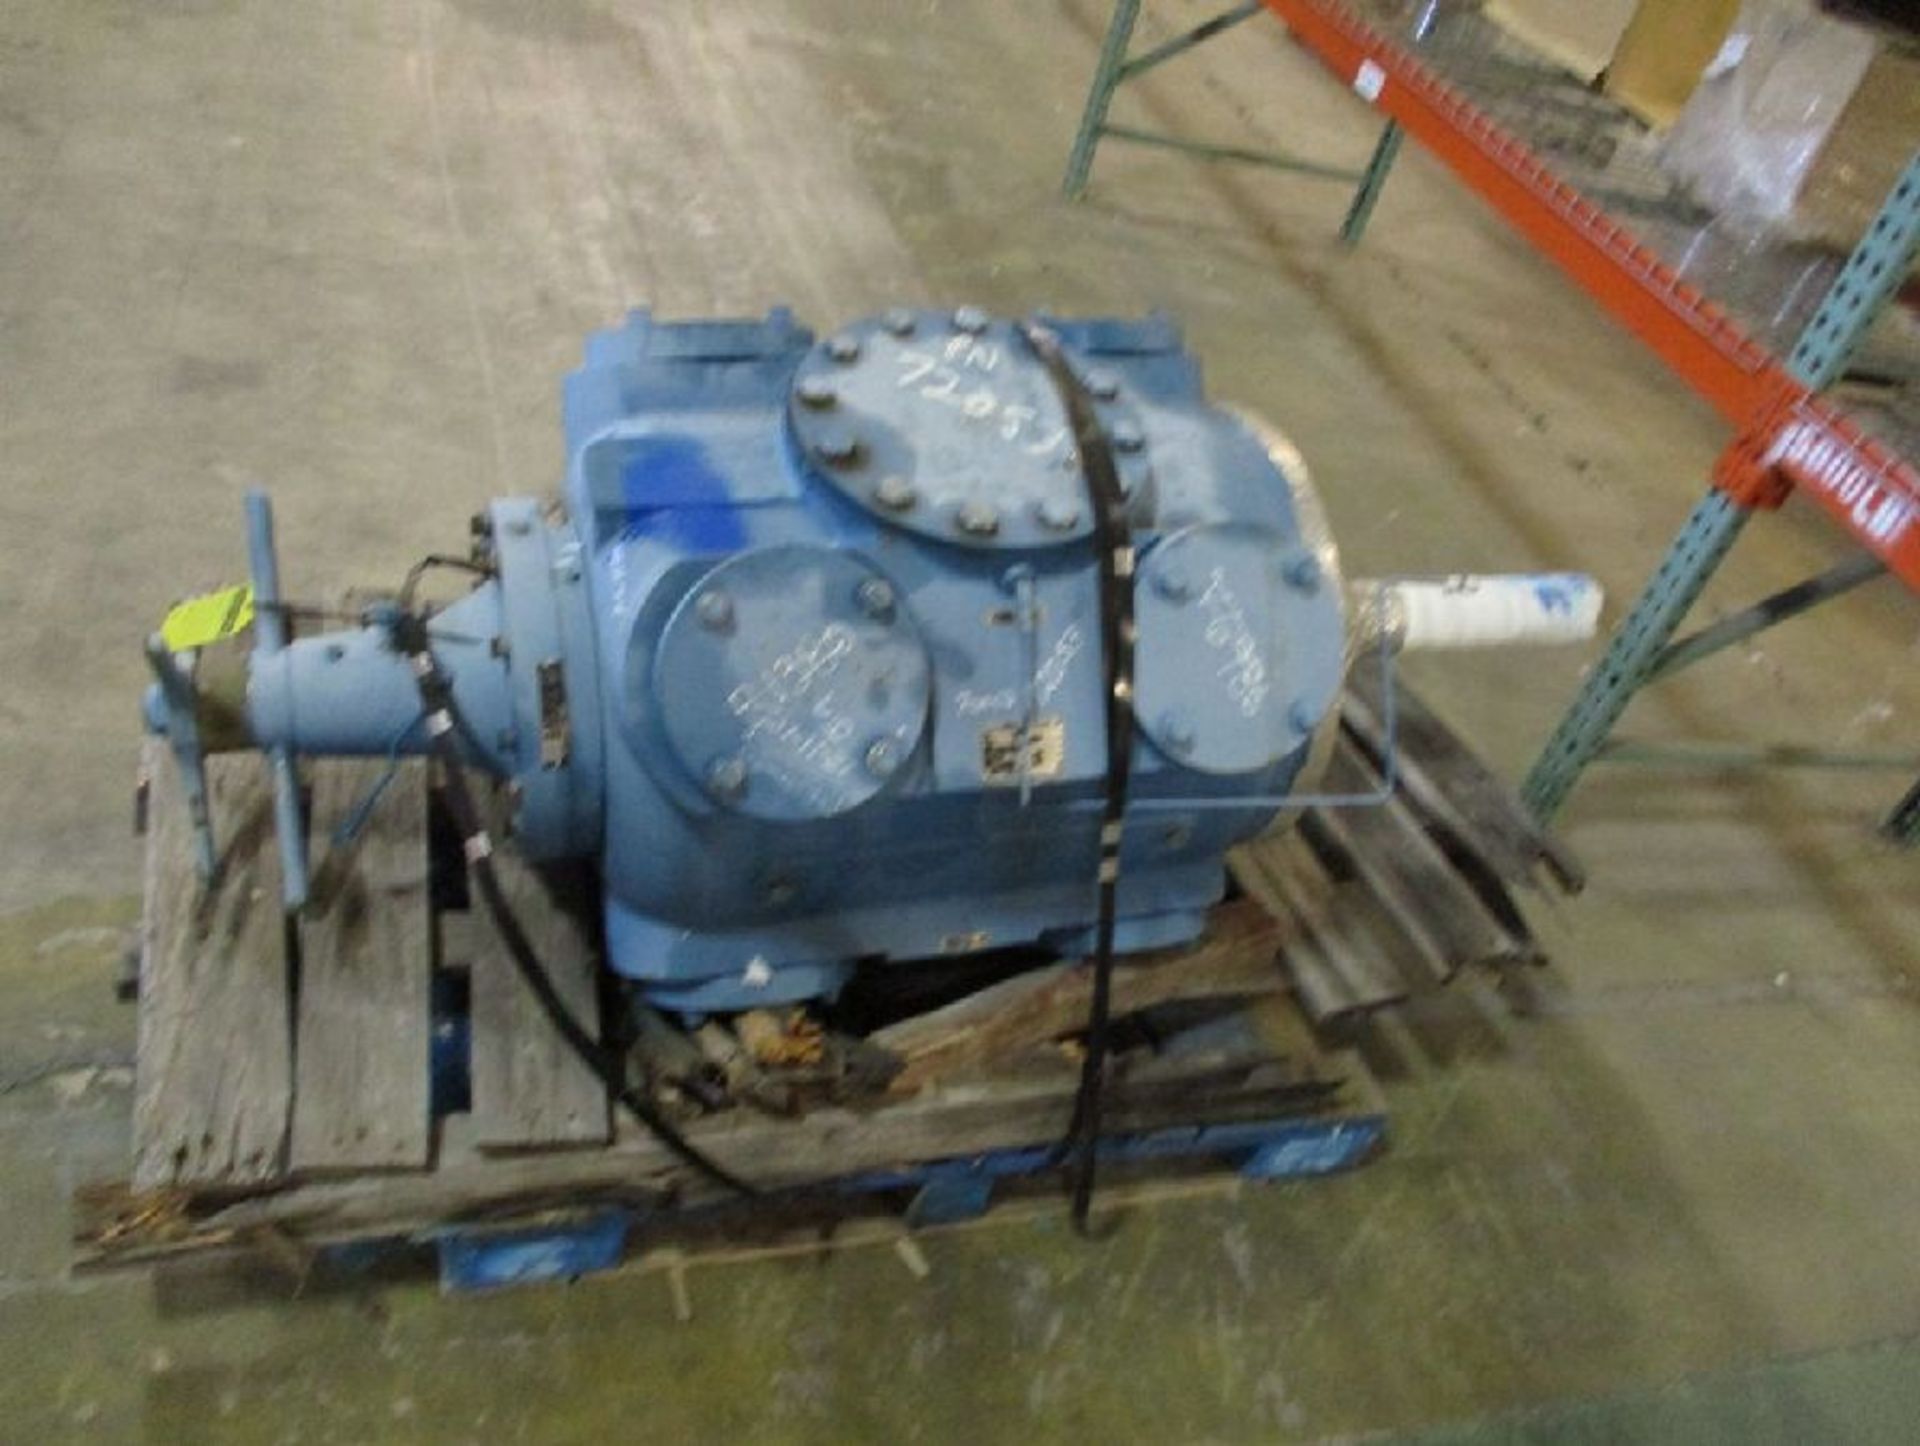 Ariel Corp Model Class K Gas Compressor Cylinder Assembly - Image 2 of 7